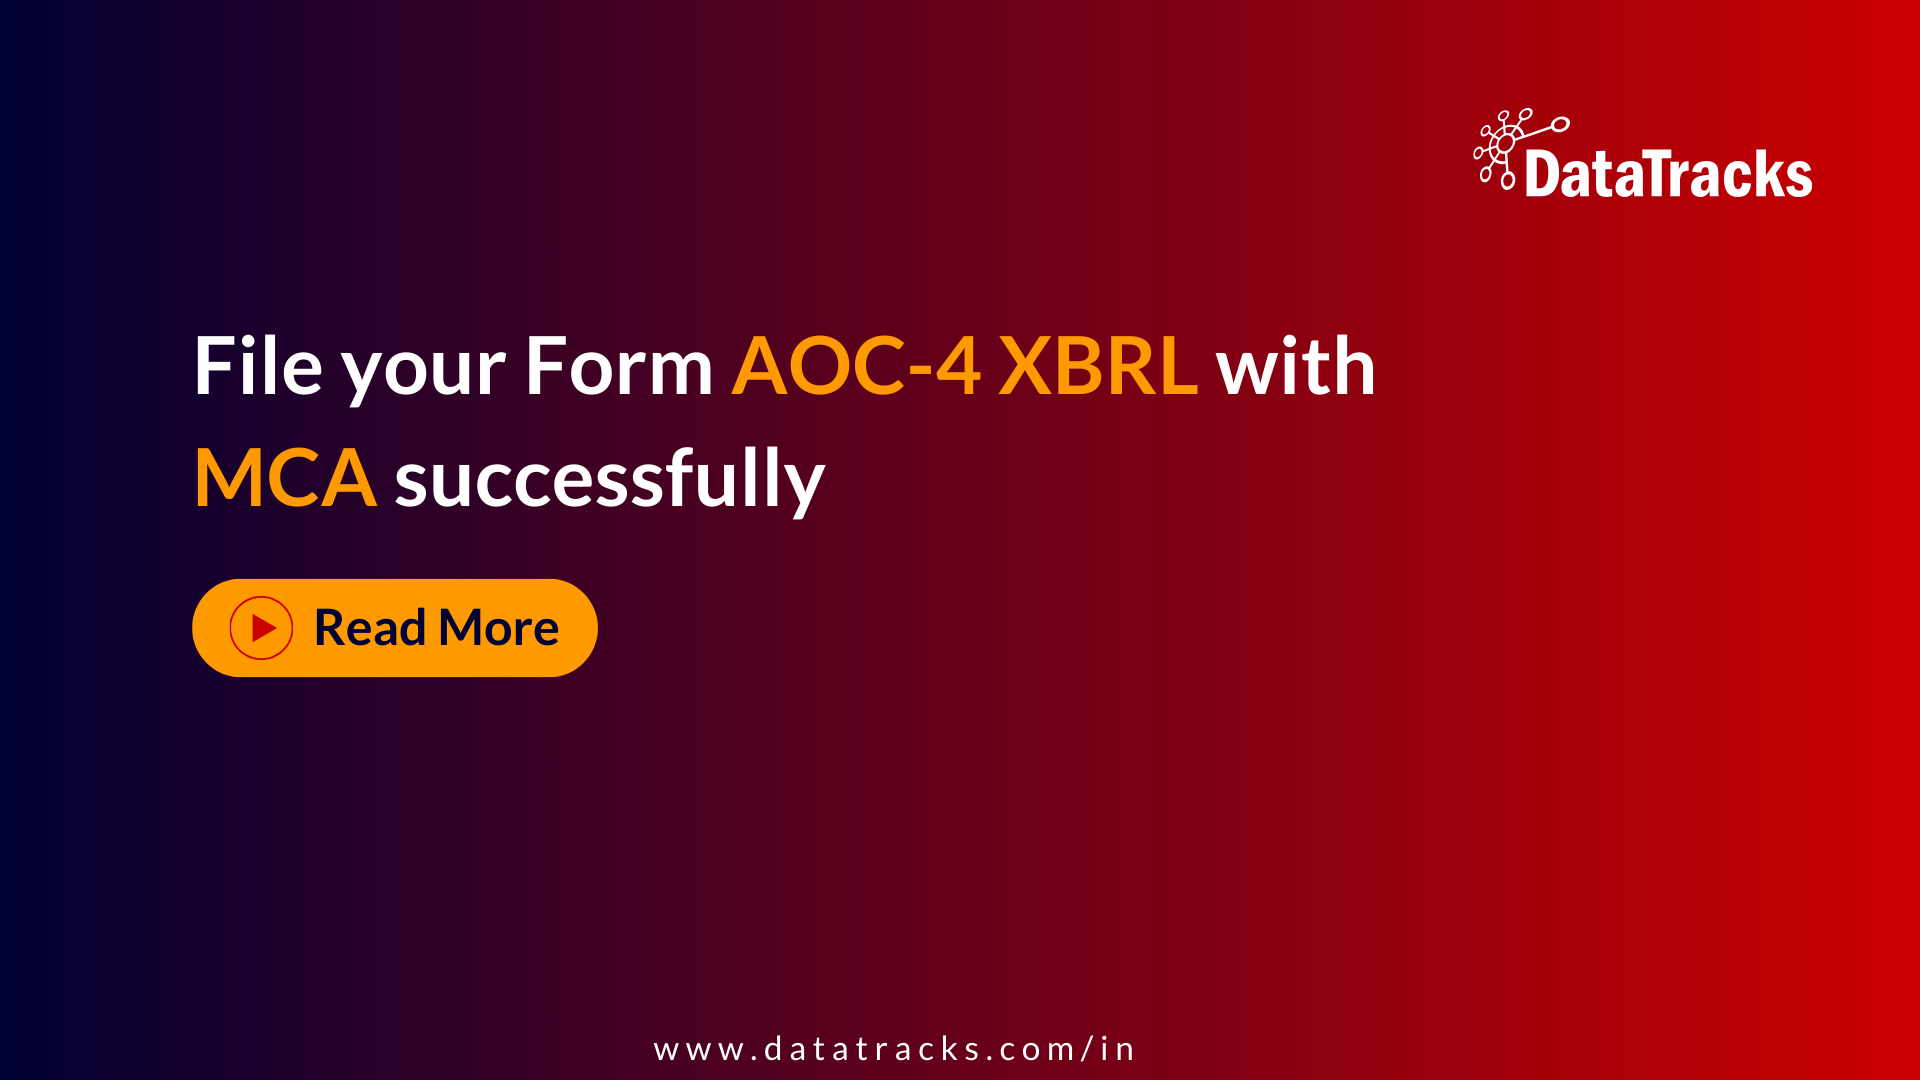 File your Form AOC-4 XBRL with MCA successfully